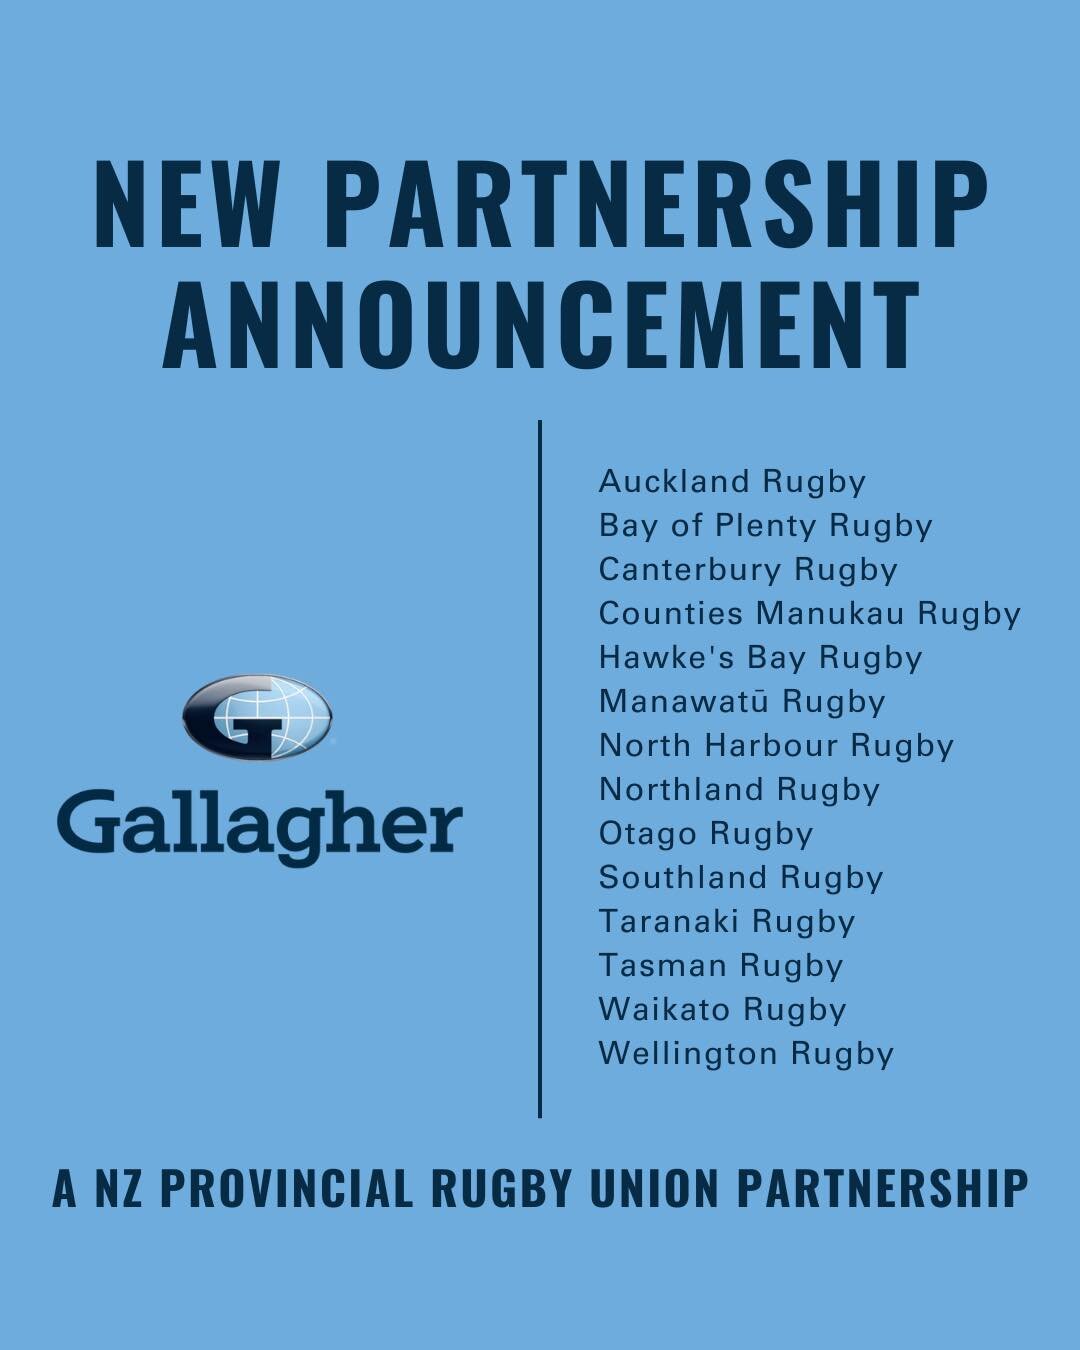 Gallagher Insurance is pleased to announce its partnership with the NZ Provincial Rugby Union Group, consisting of the 14 major provincial rugby unions throughout New Zealand. This is an unprecedented collaboration with the 14 provincial rugby unions